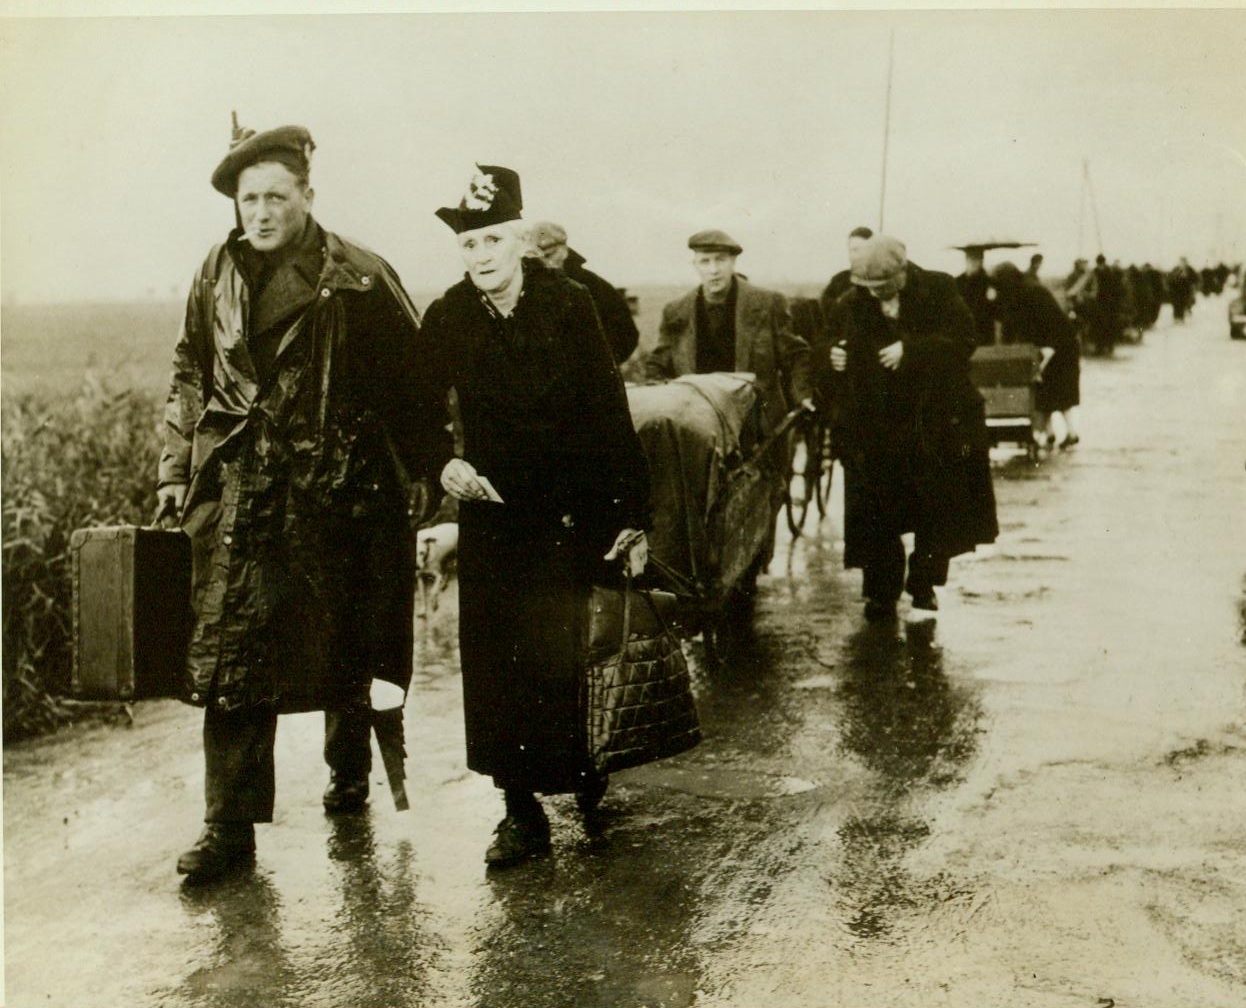 Exit from Dunkirk, 10/9/1944. Dunkirk, France – Walking beside a British Soldier who carries her bag, a white-haired woman of Dunkirk leaves the besieged city during the 60-hour truce. Behind her, a long column of civilian refugees trudges the rain-soaked road away from Dunkirk. Credit: –WP-(ACME);